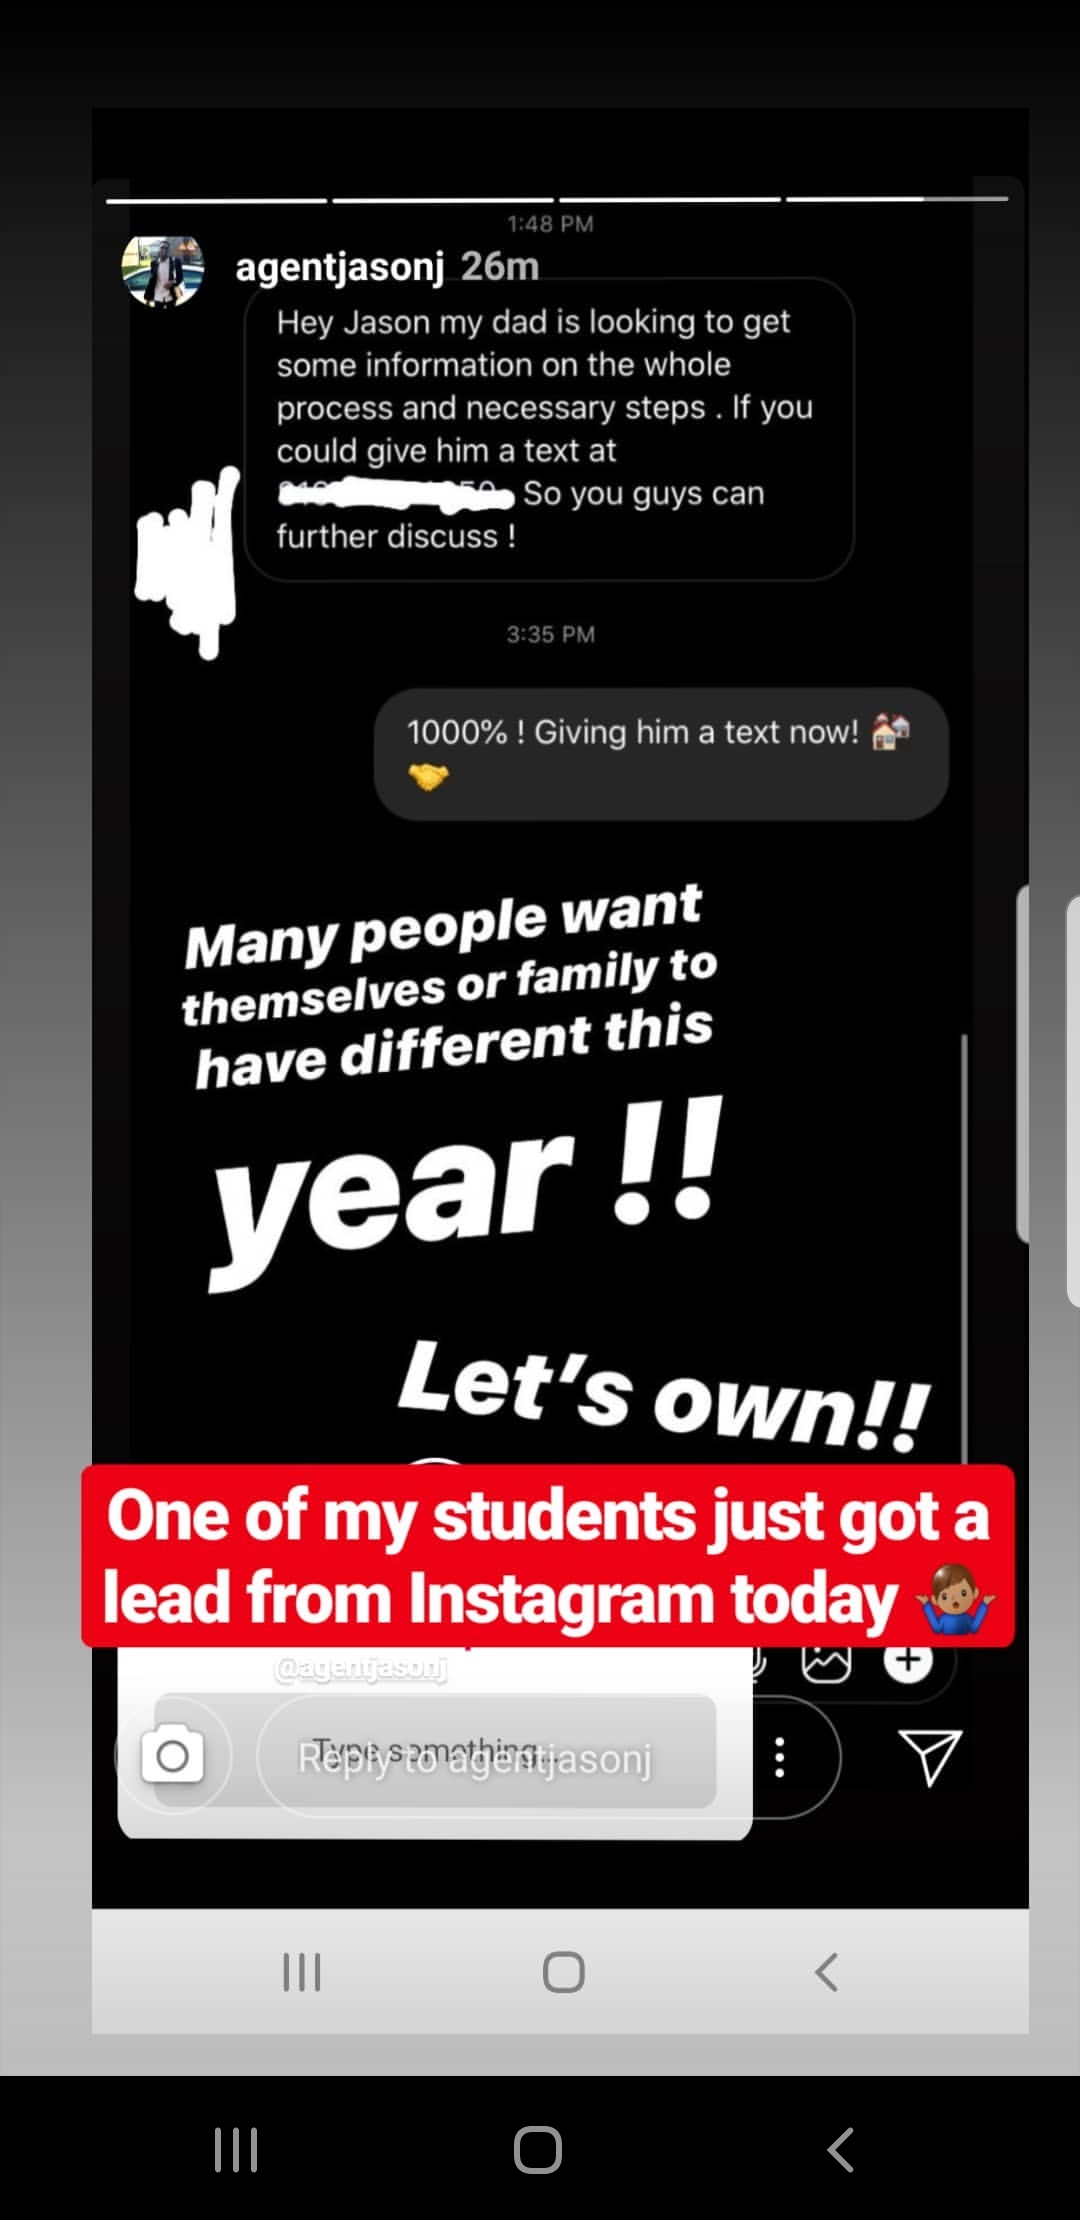 Here's a screenshot of on my students from Florida who is getting leads from Instagram!